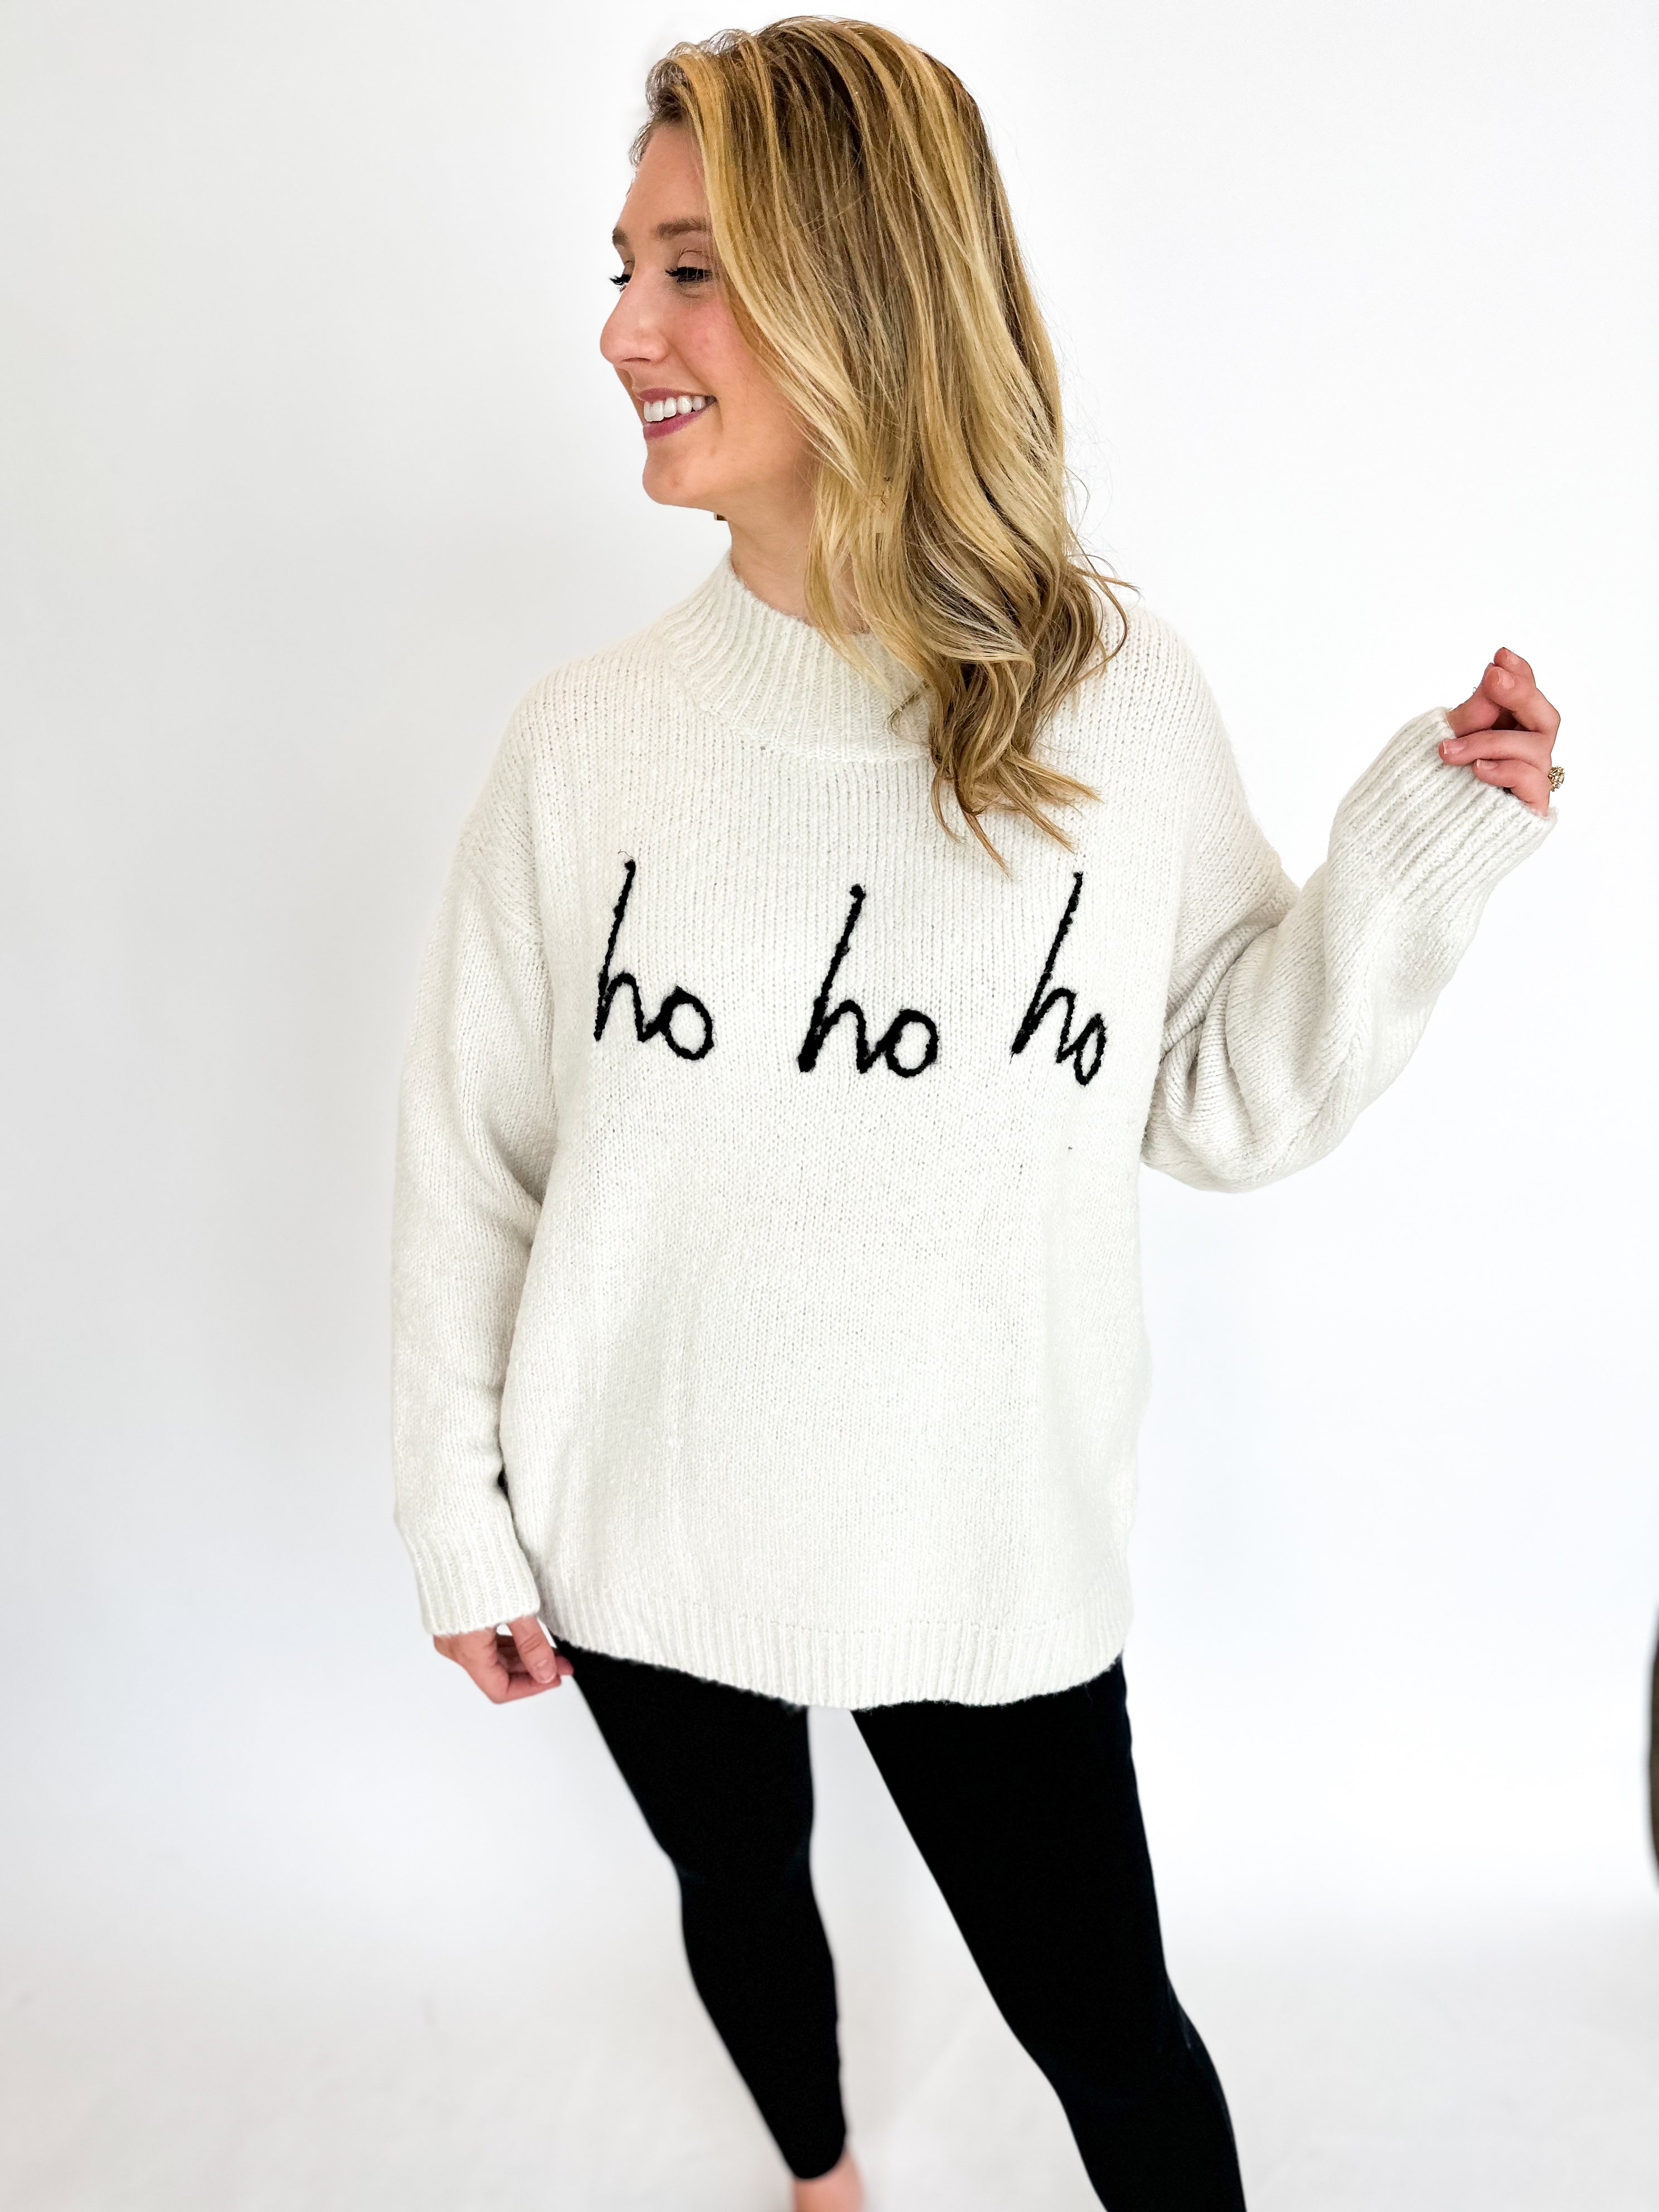 Vintage HO HO HO Sweater Top-230 Sweaters/Cardis-GILLI CLOTHING-July & June Women's Fashion Boutique Located in San Antonio, Texas